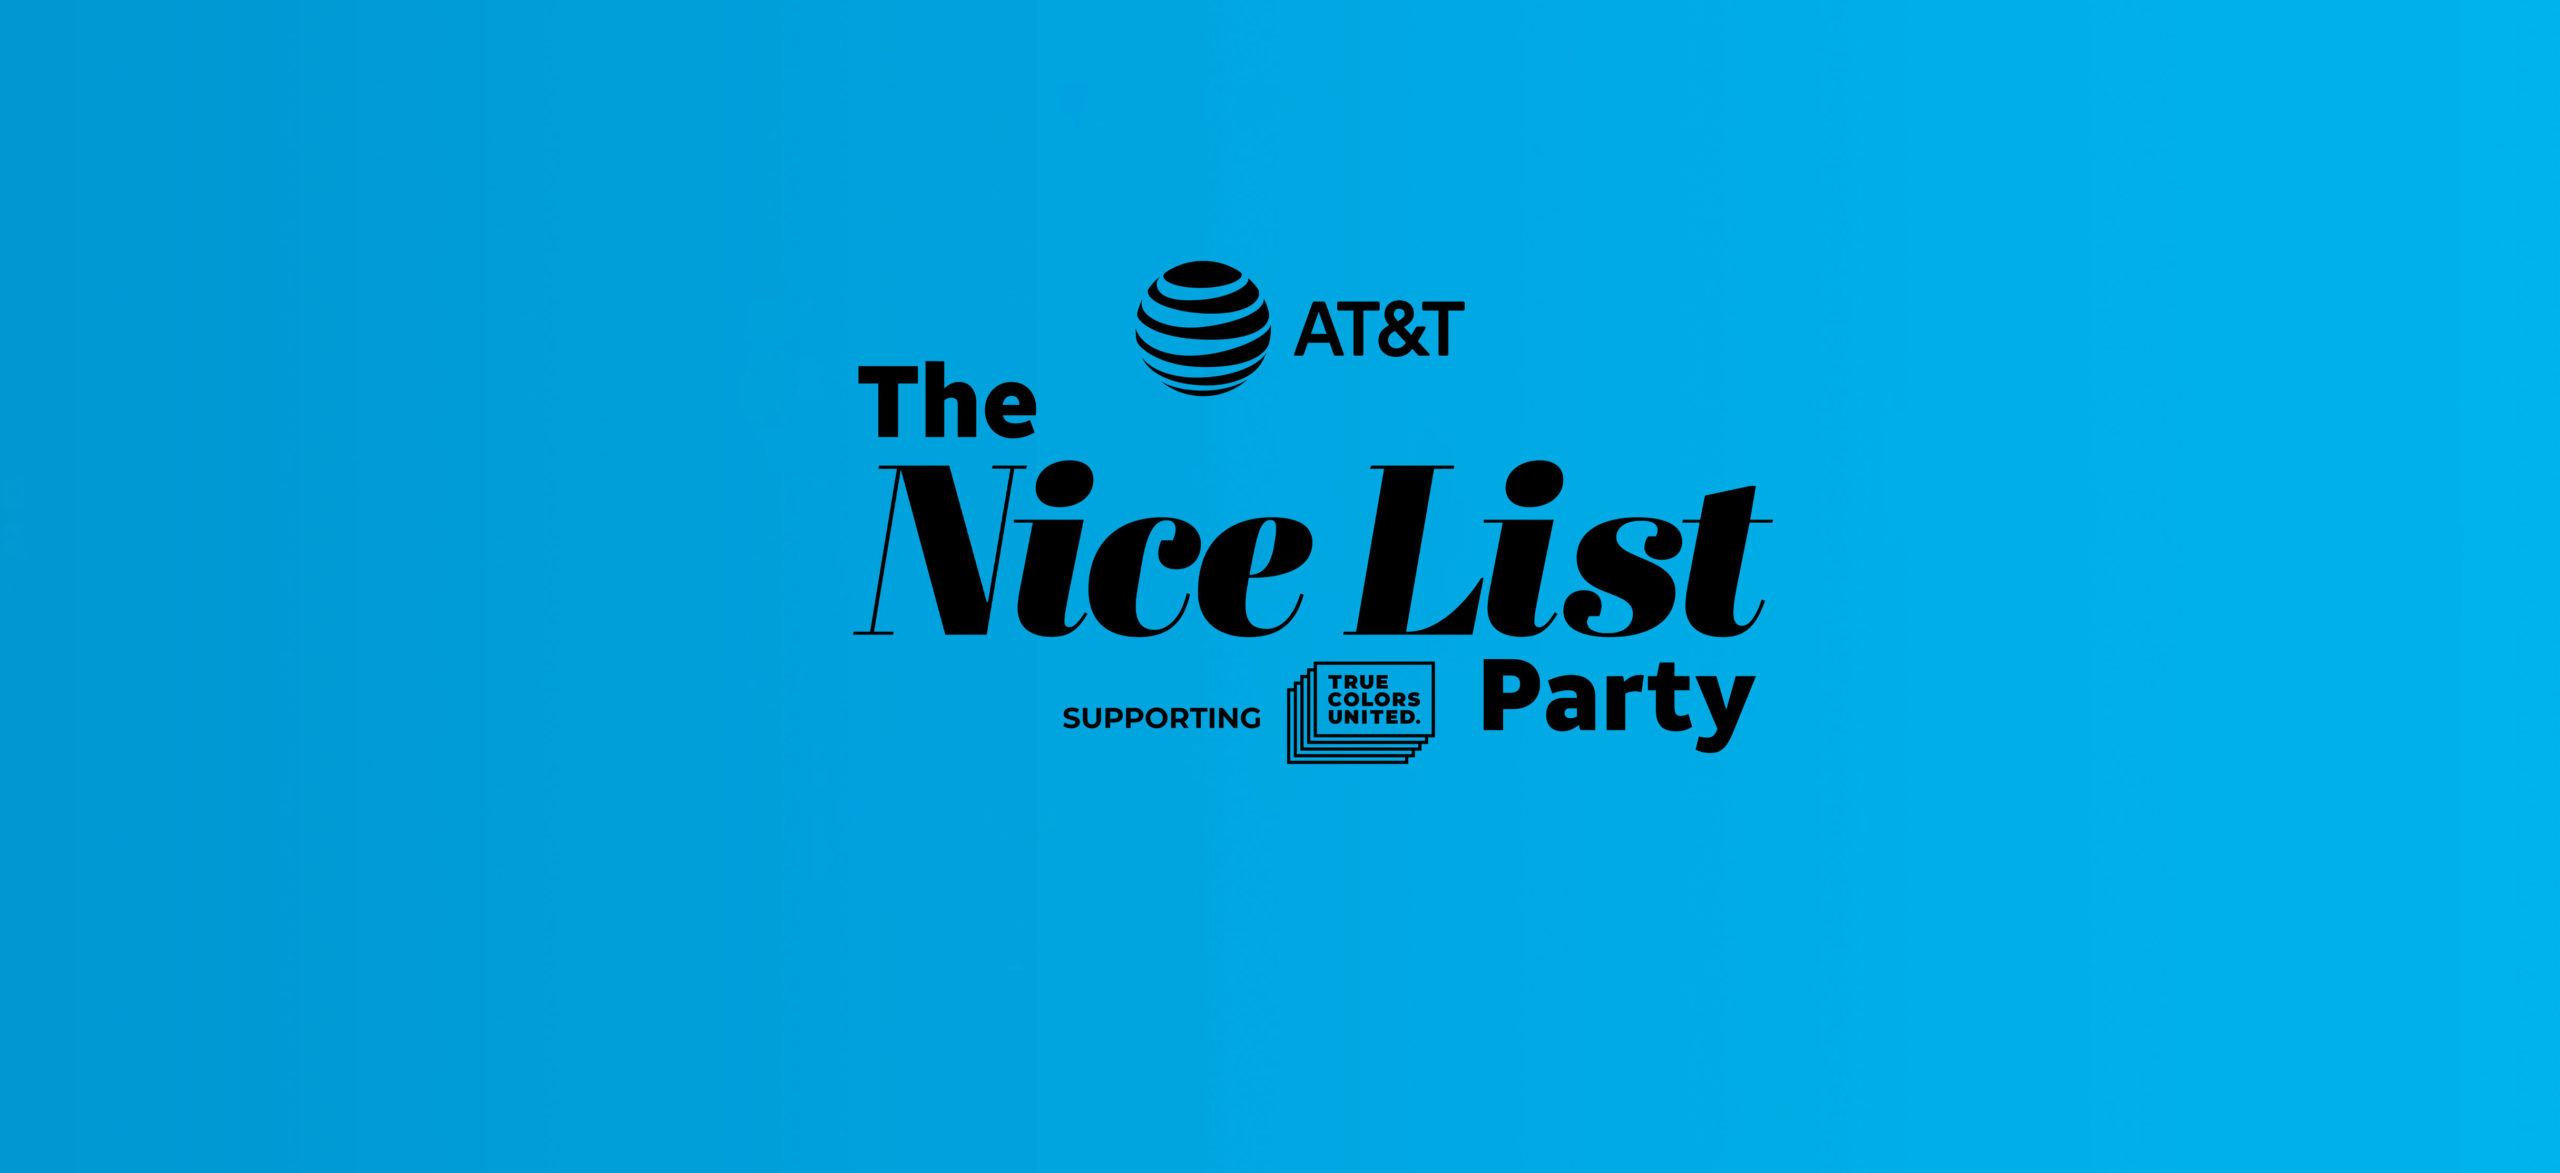 Background image for The Nice List Party